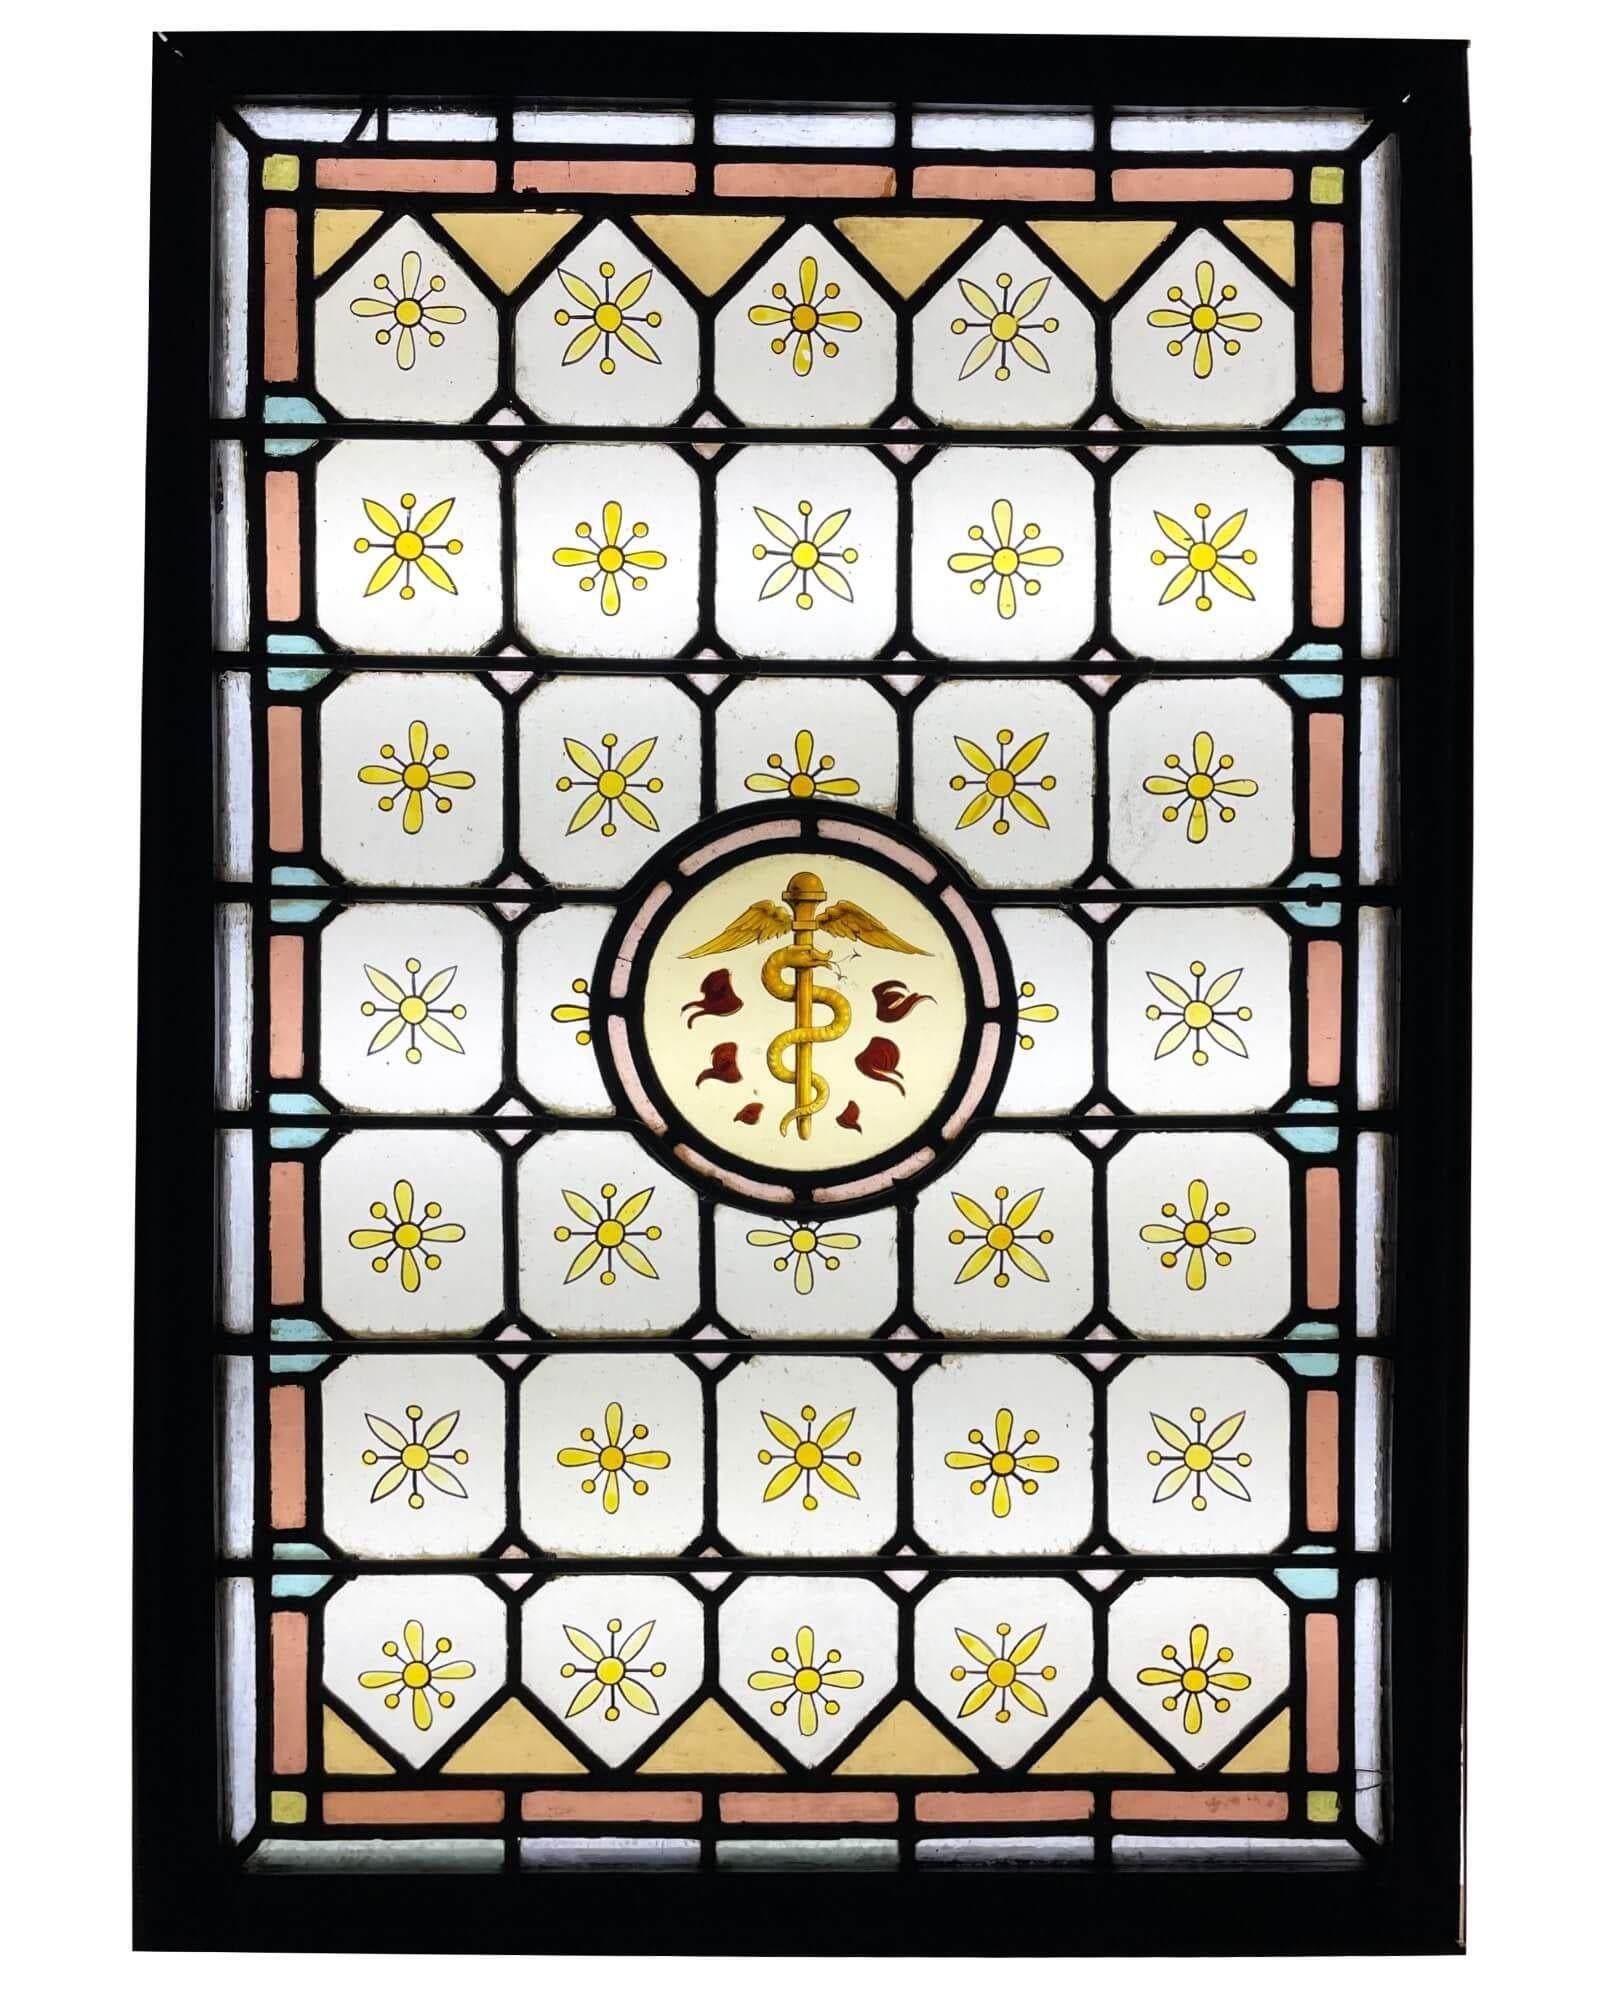 A late 19th century antique stained glass window of the Greek Asclepius Rod, the symbol of health and scientific medicine. It depicts a serpent entwined around a staff with angel wings at the top.

At the centre is a distinguishable illustration of